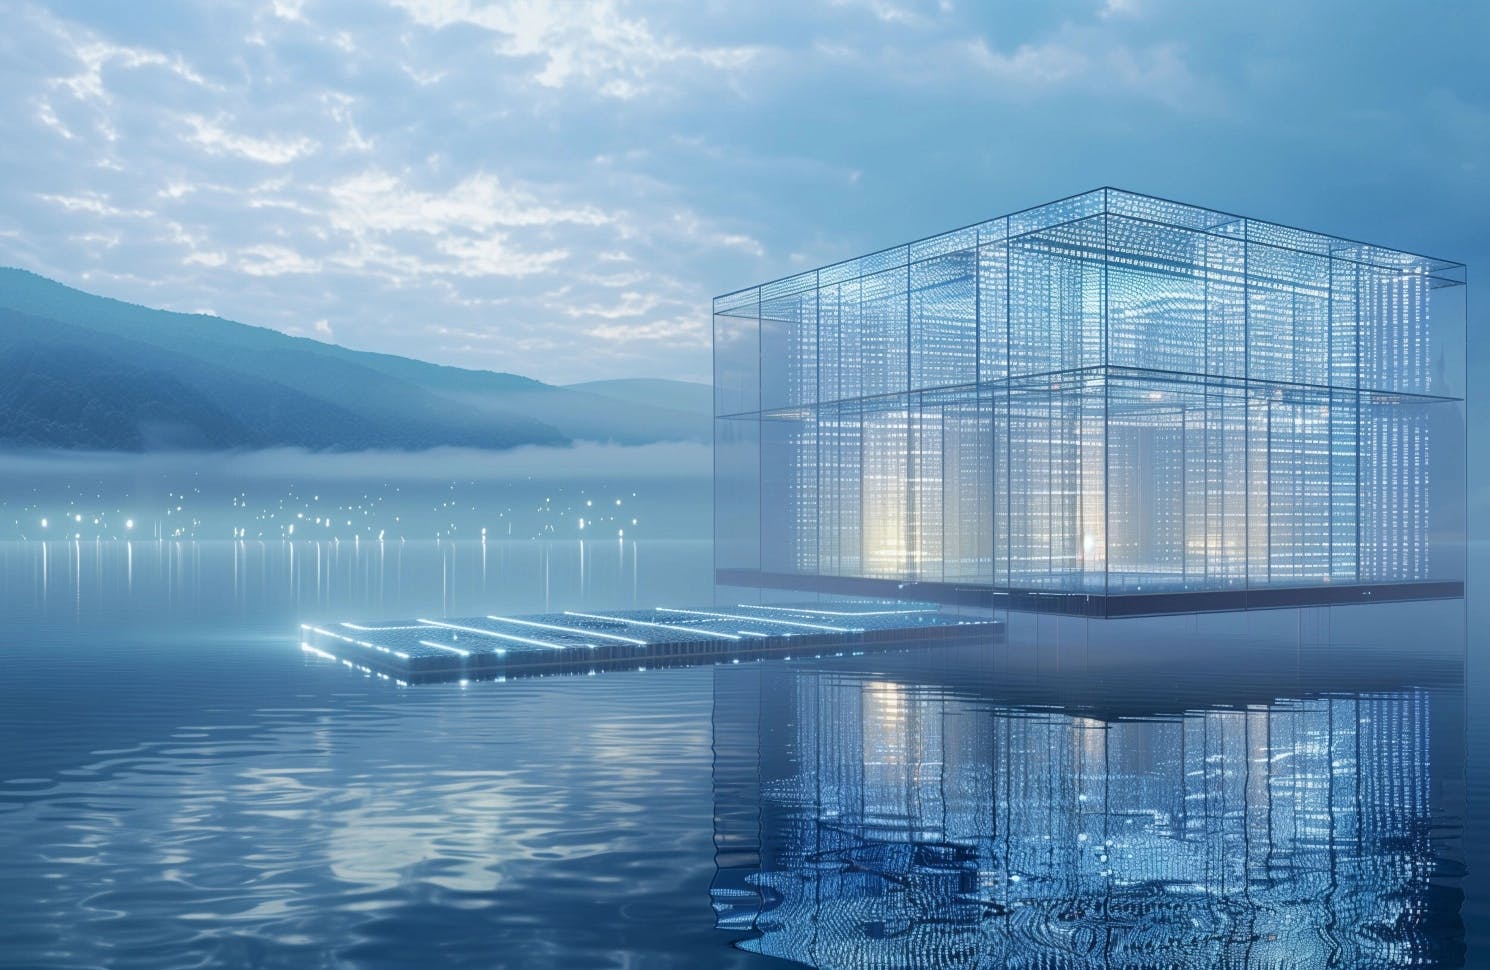 Data center that looks like a house on a quiet, peaceful lake representing a data lakehouse